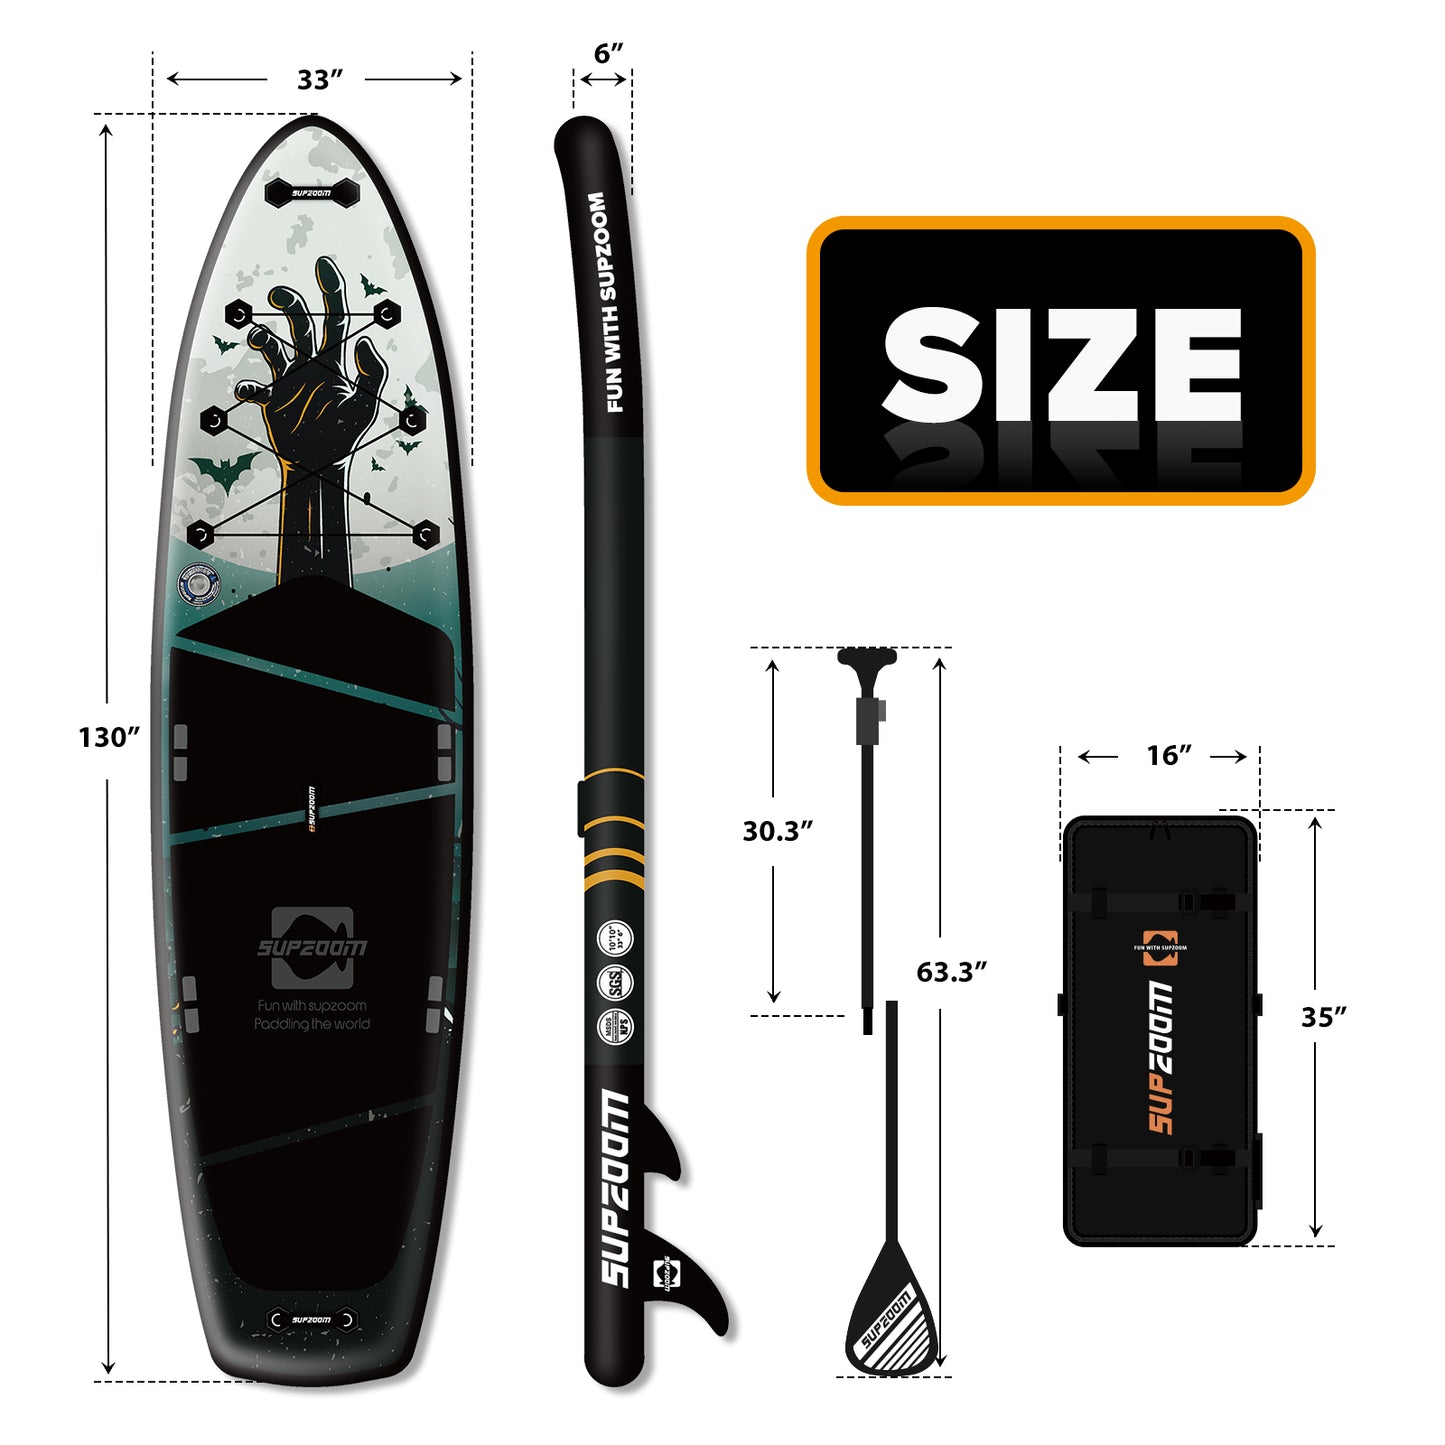 SUPZOOM 10'10" all round double layer Halloween skeleton hands inflatable paddle board